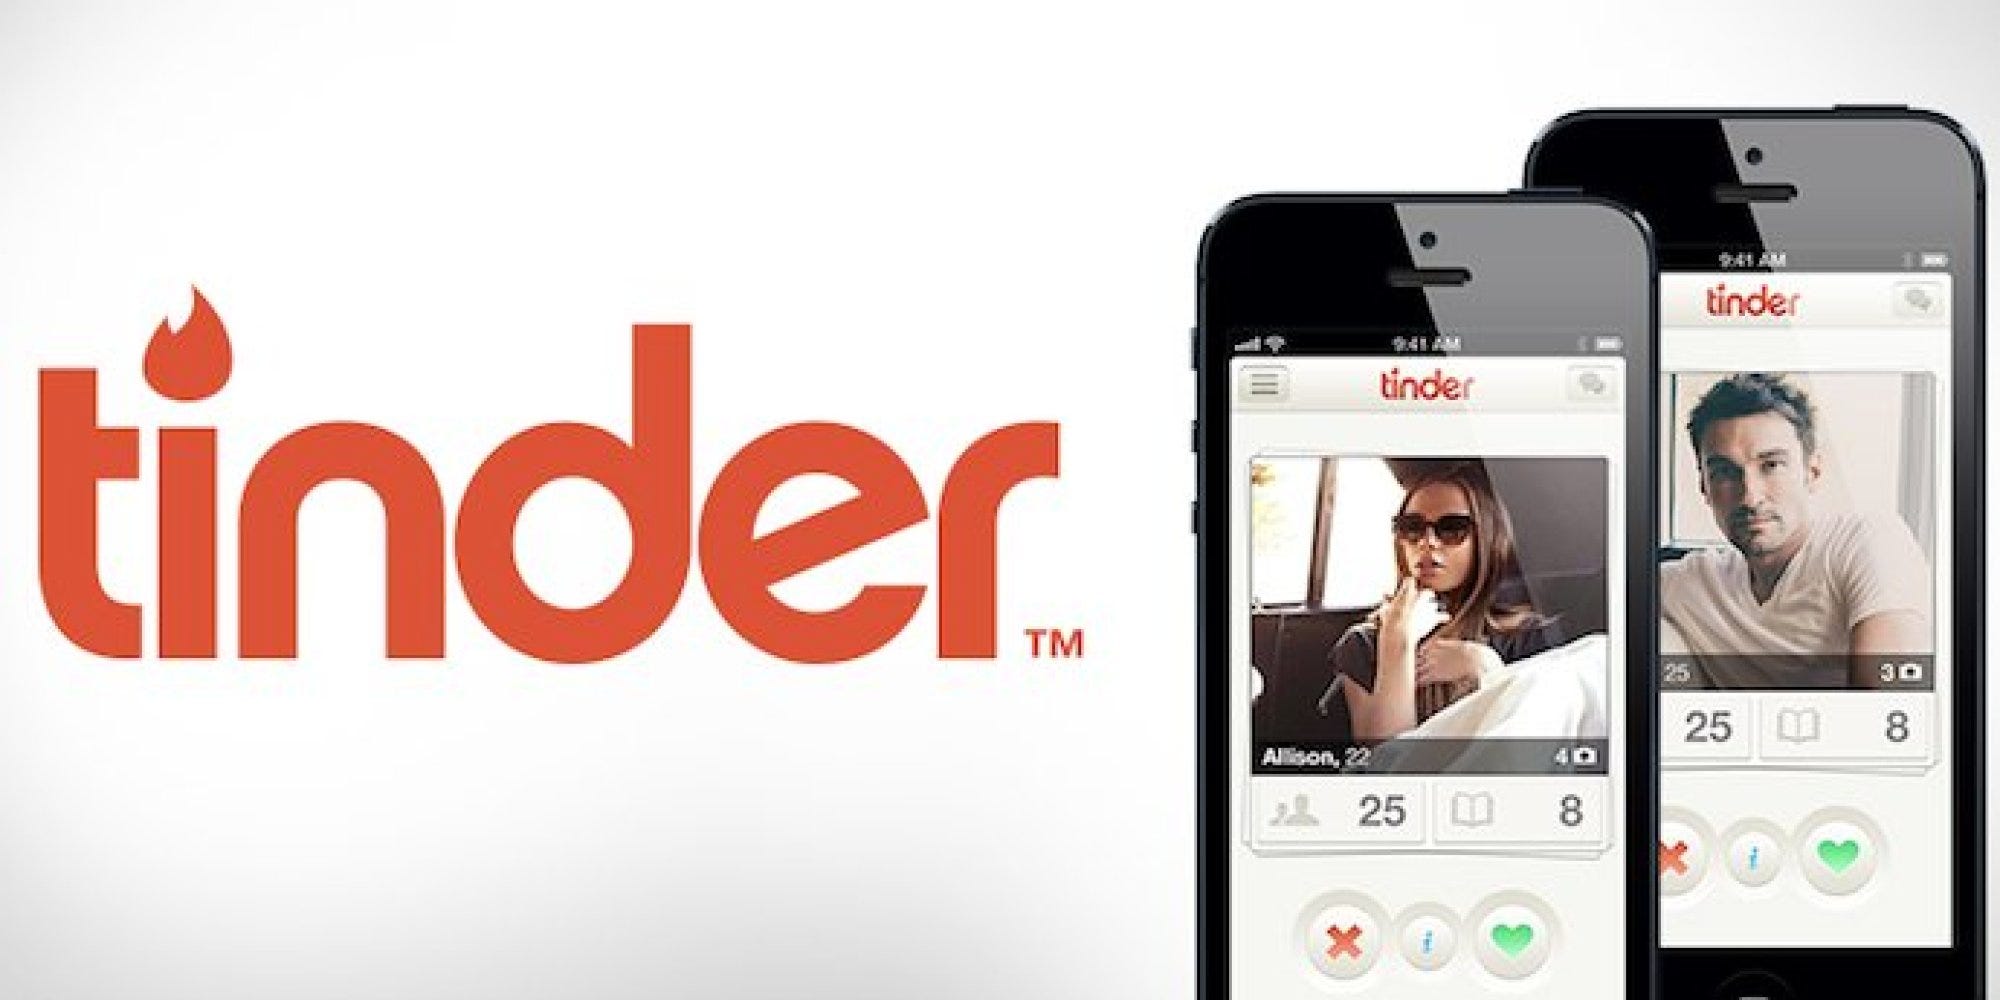 tinder, hinge, happn, bumble, the league, dating apps, dating, dating app dive